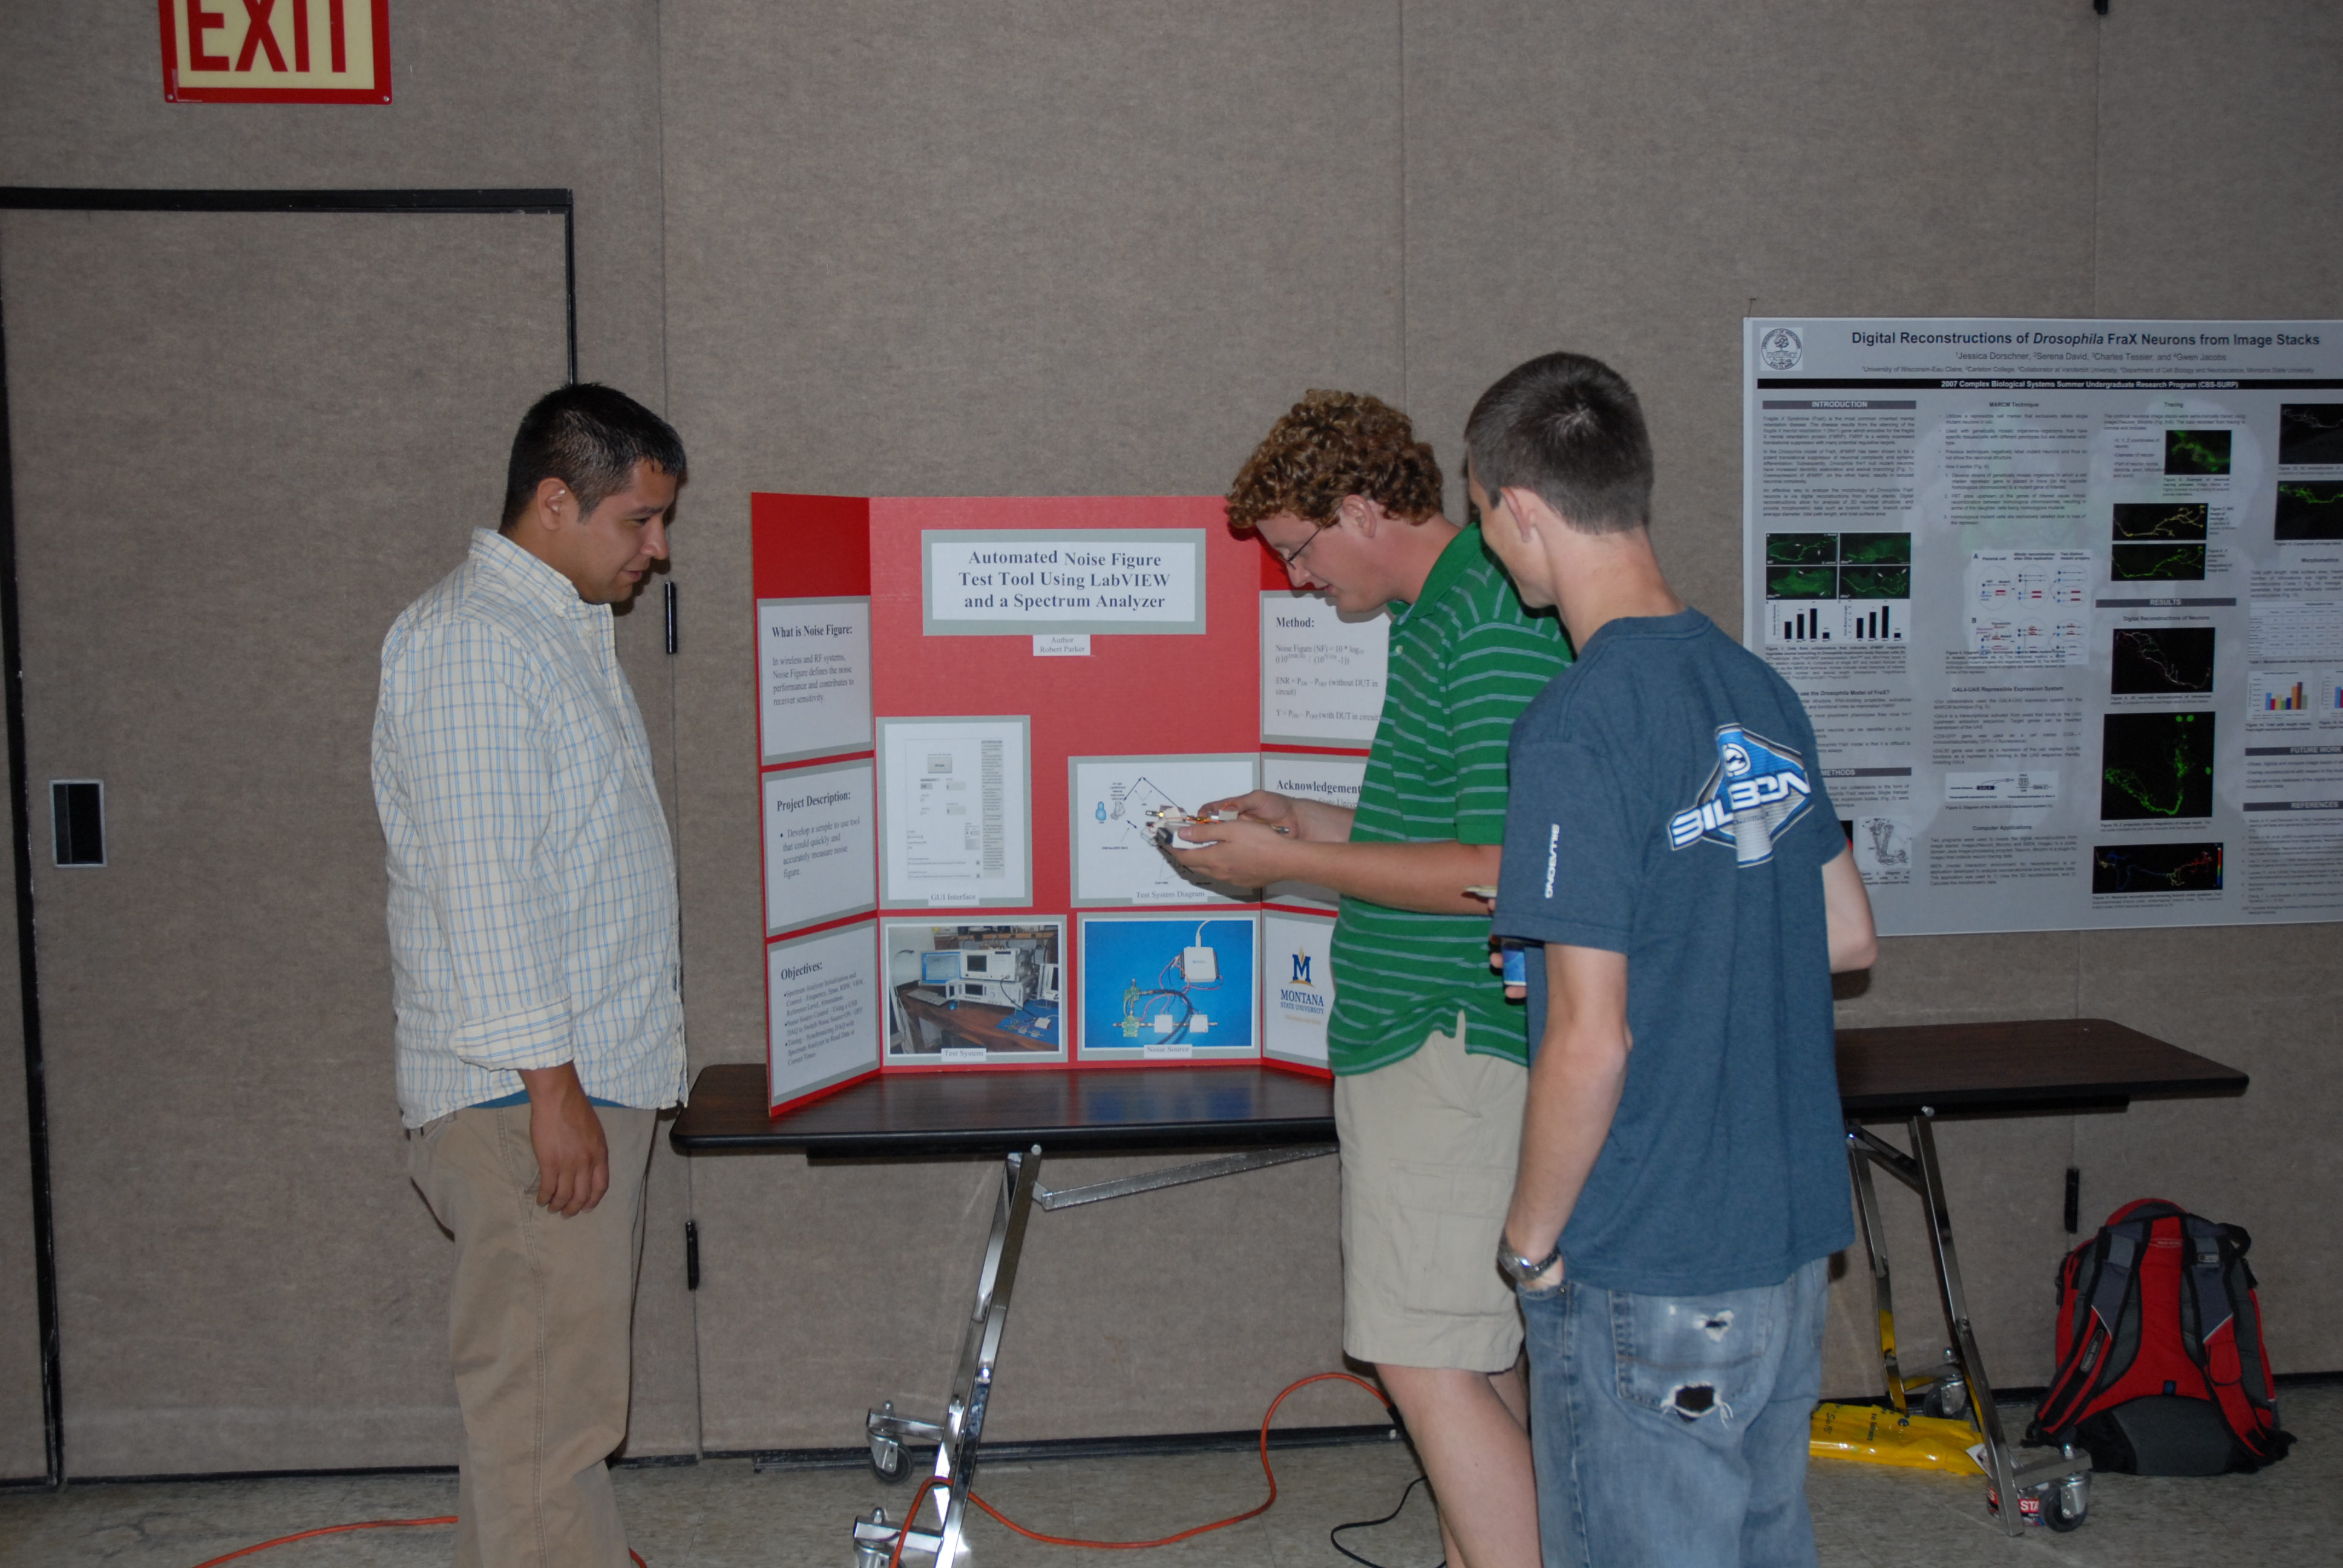 students at a poster display session